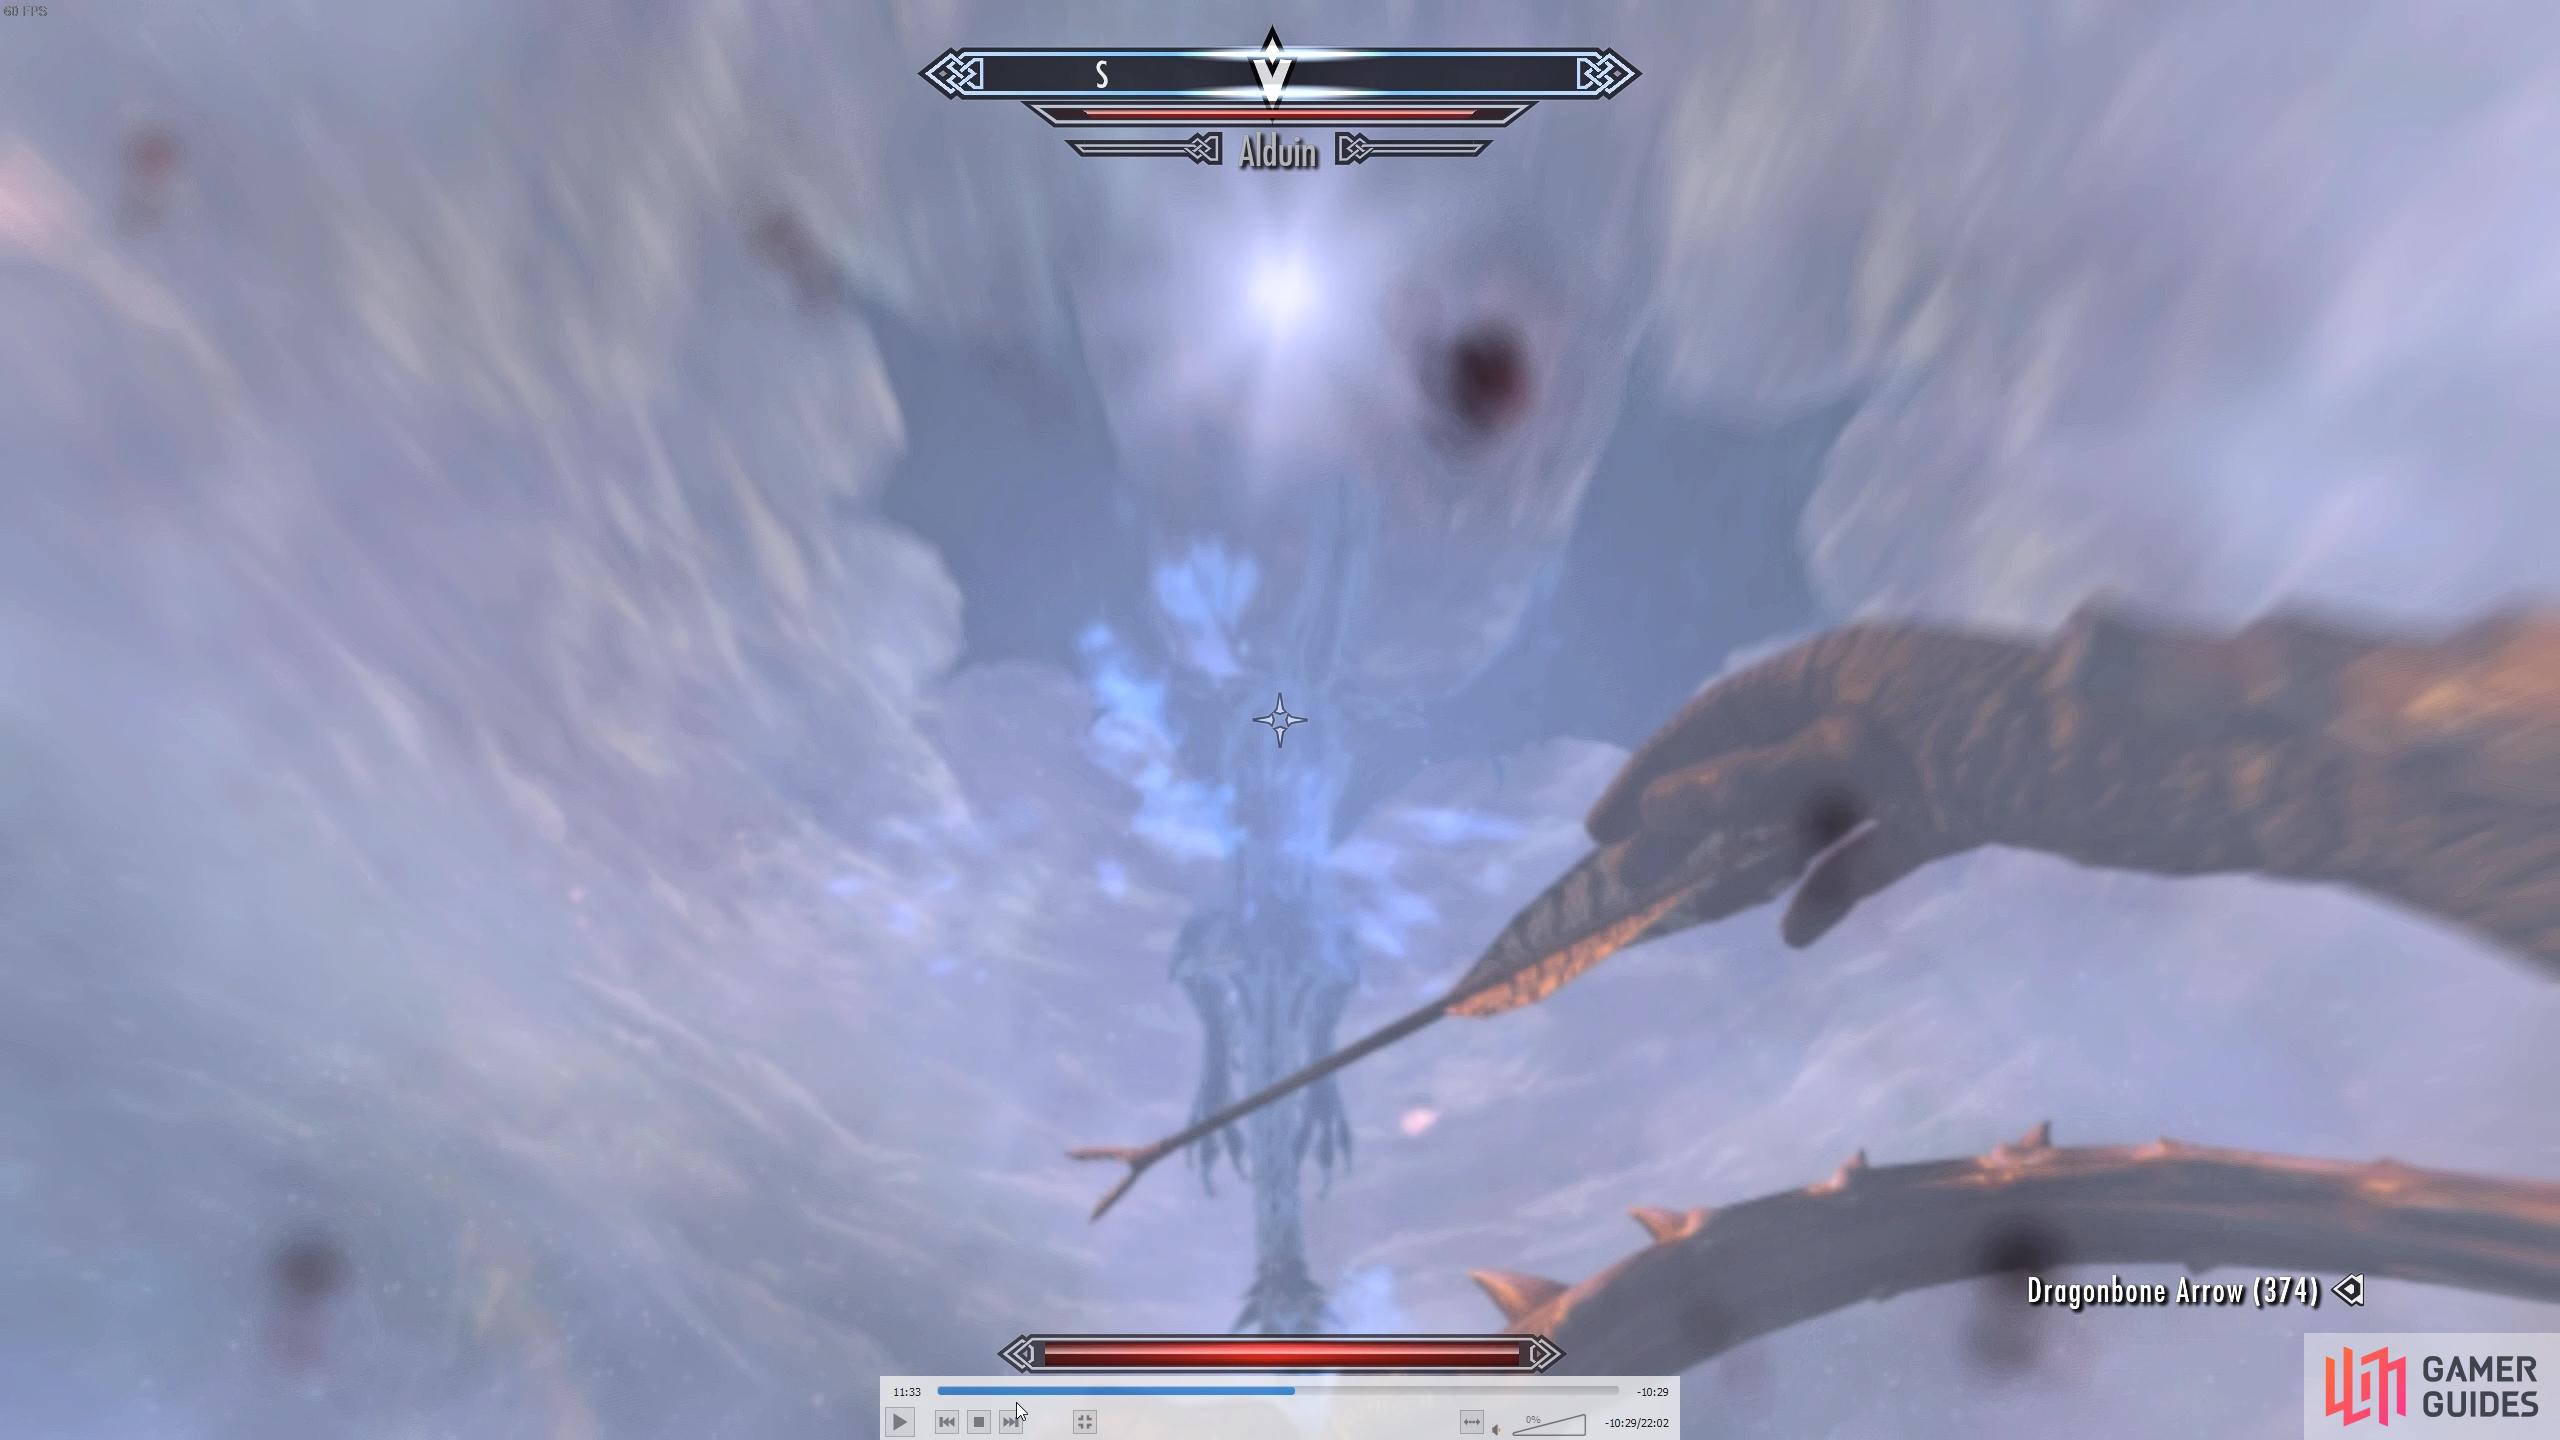 Wait for Alduin to hover before using Dragonrend.